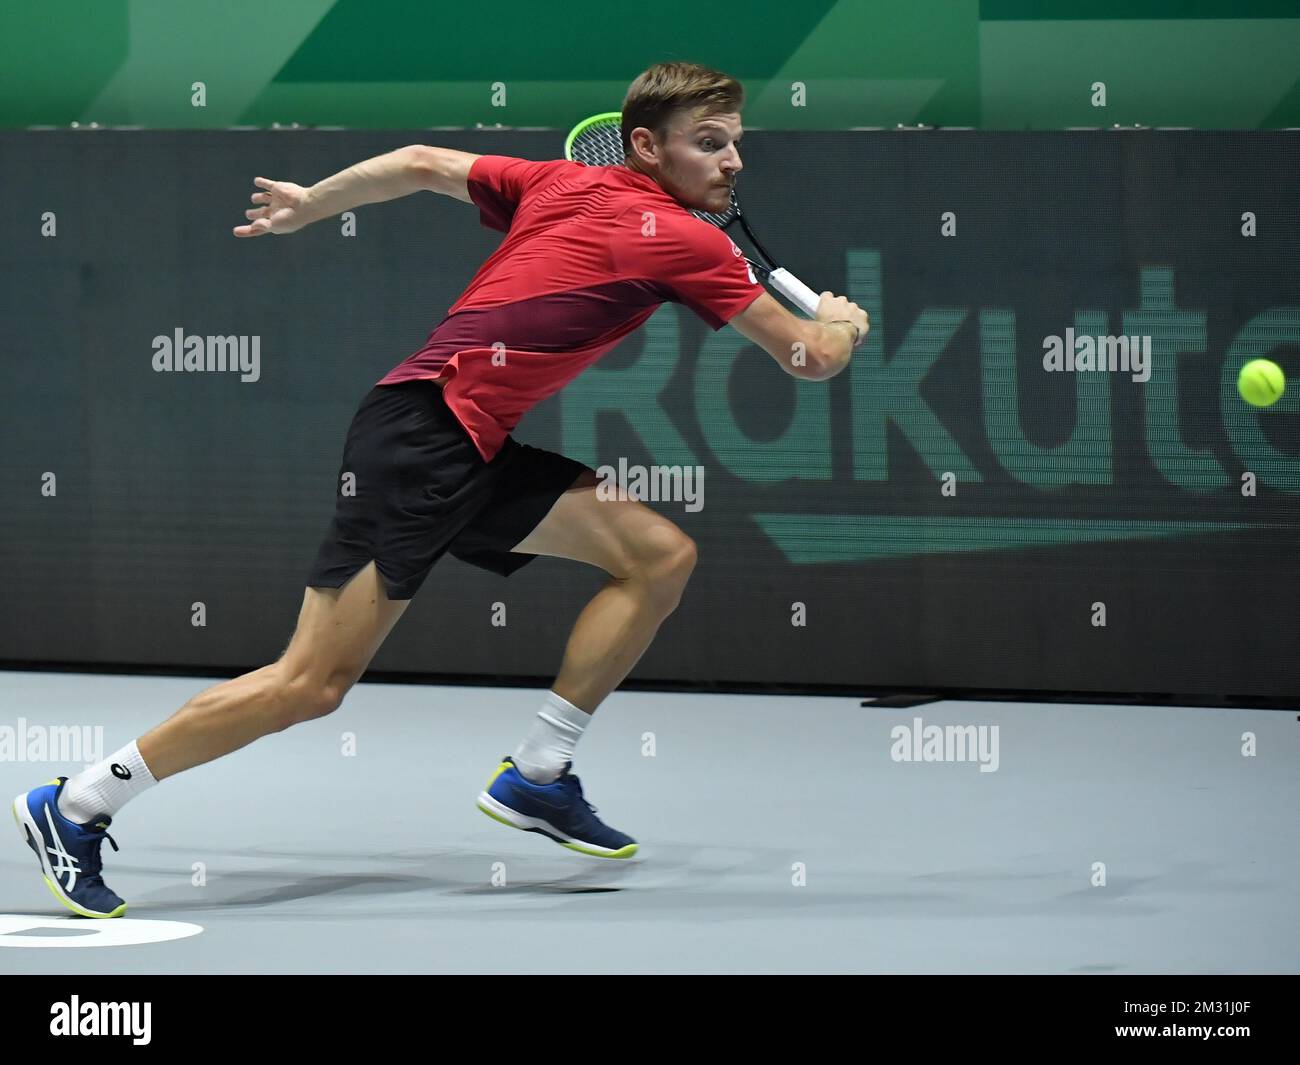 Belgian David Goffin pictured in action during a tennis match against  Australian Alex de Minaur, the second match in the David Cup meeting  between Belgium and Australia, Wednesday 20 November 2019, in